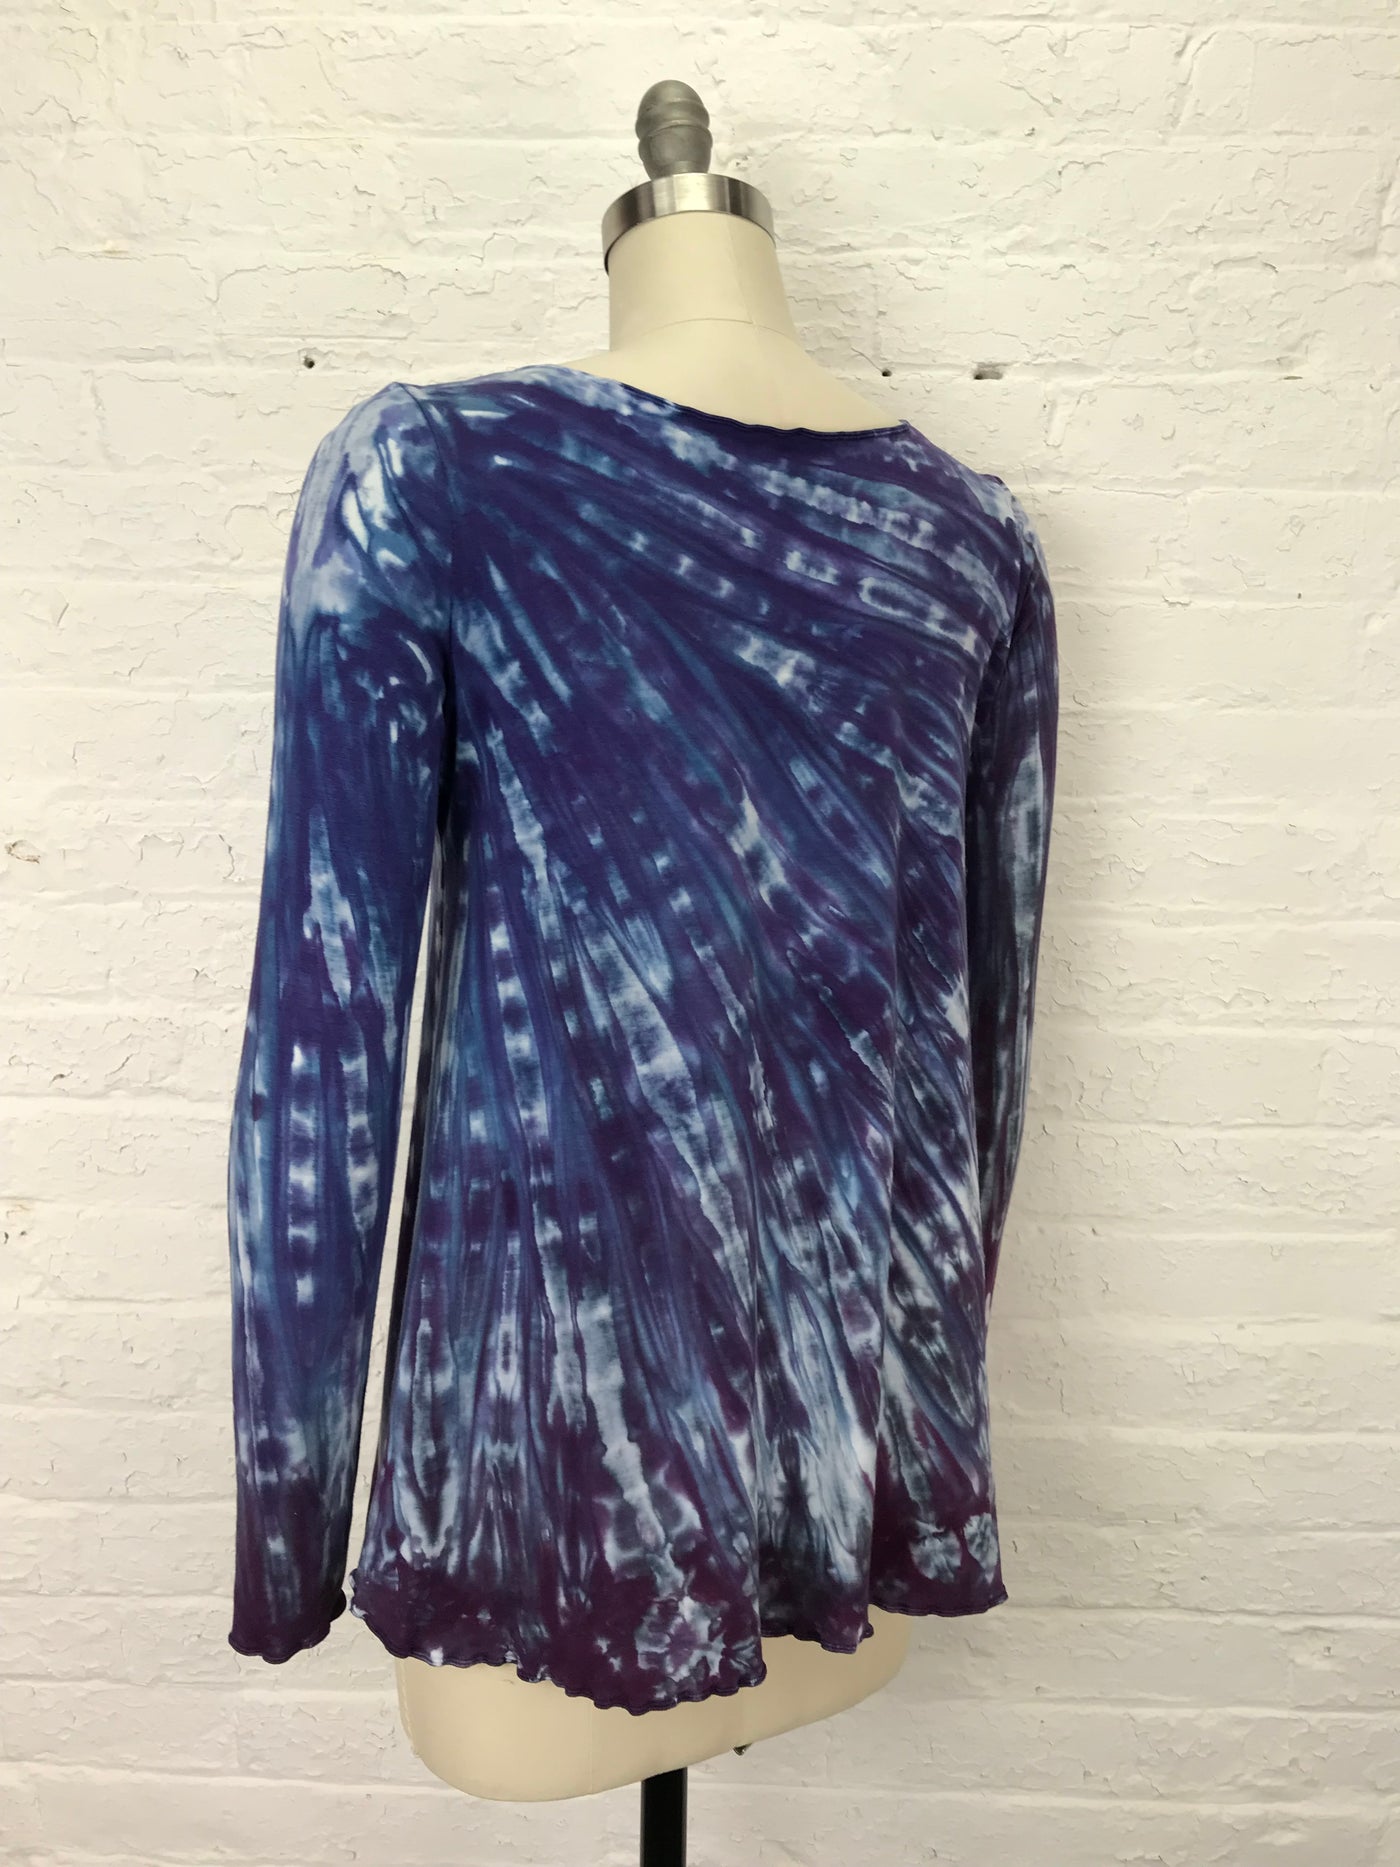 January Tunic in Web of Blue Violet